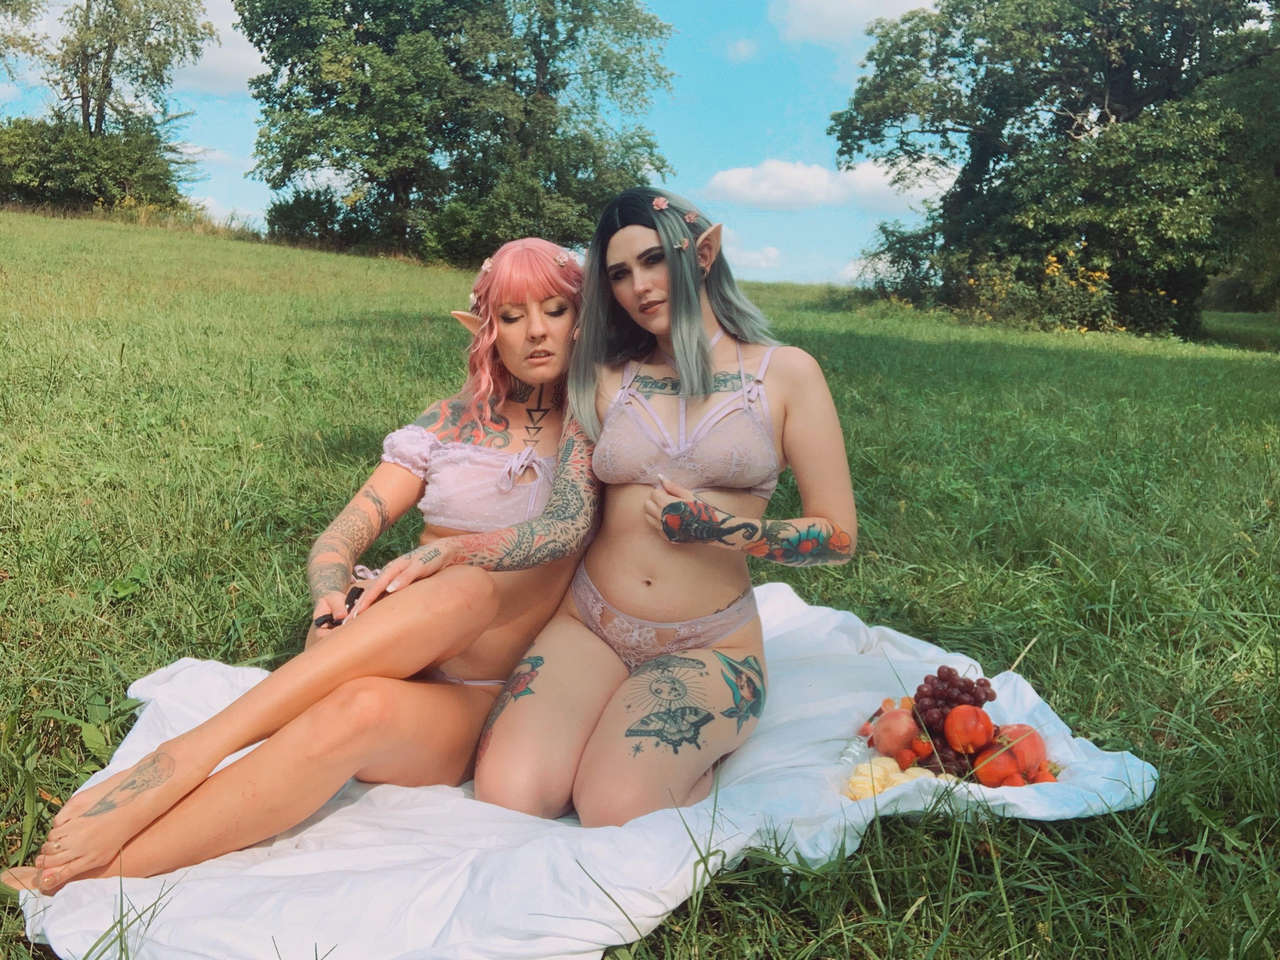 Two Faeries Serving Up A Picnic What Are Yo